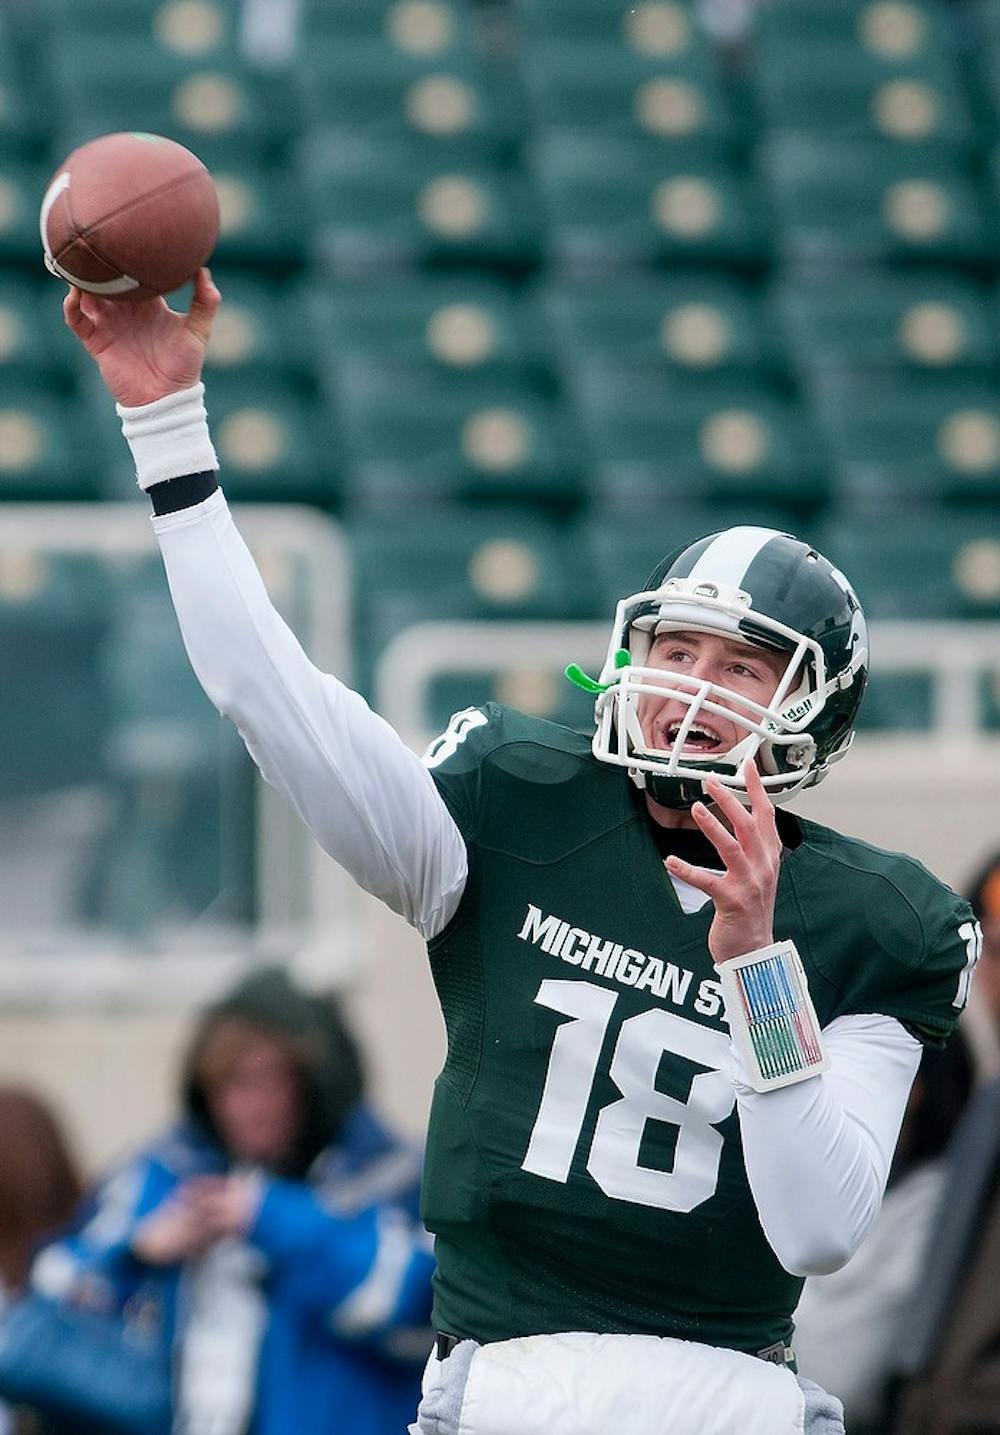 	<p>Sophomore quarterback Connor Cook throws the ball during the Green and White Spring Game on April 20, 2013, at Spartan Stadium. The White team won 24-17. Julia Nagy/The State News</p>